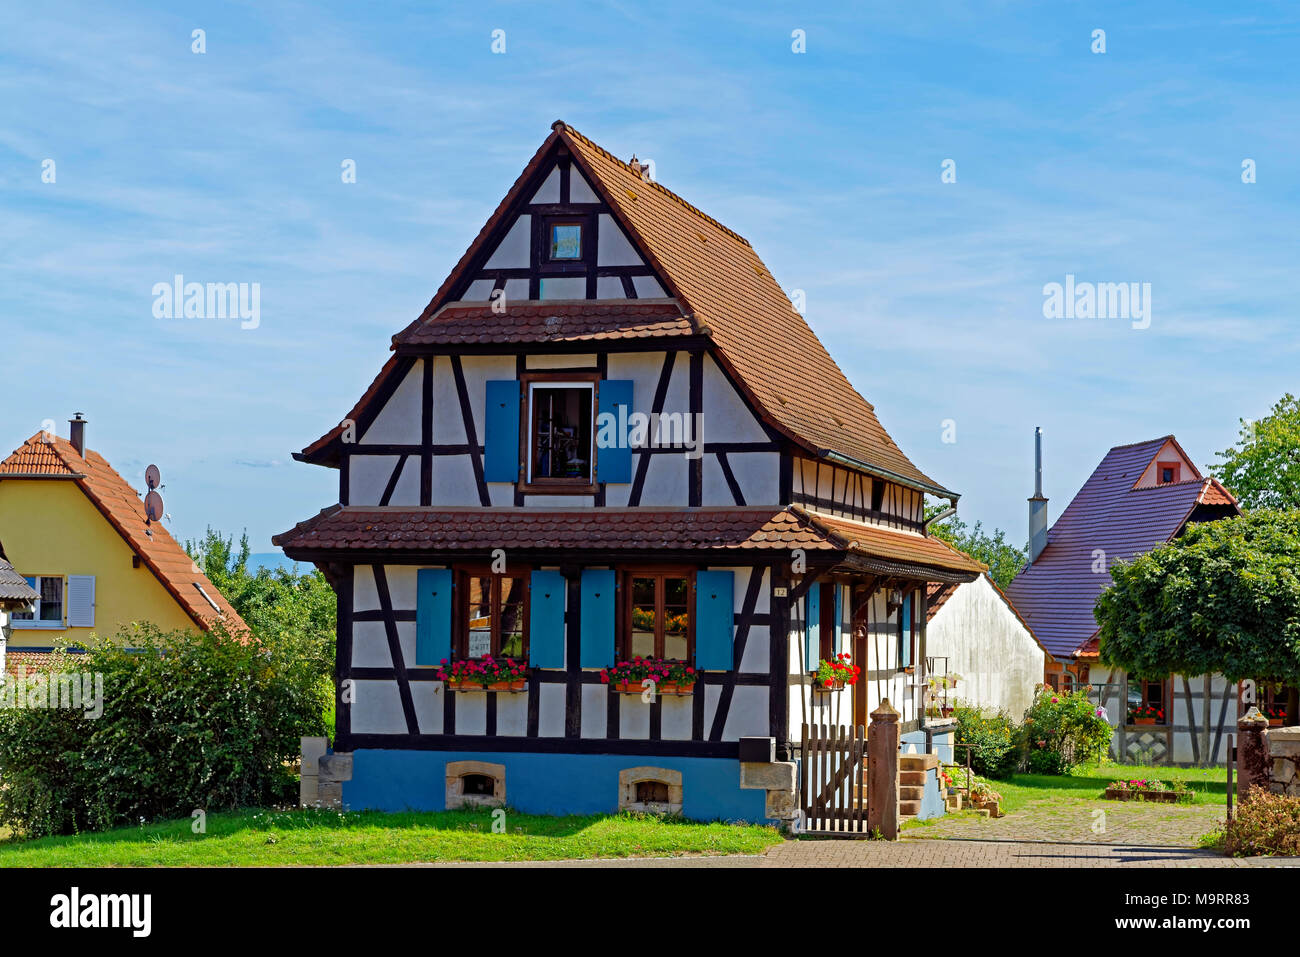 Europe, France, the Rhine, Bas (Alsace), Soultz-sous-Forêts, Rue Principale Hohwiller, half-timbered house, small, architecture, trees, buildings, pla Stock Photo